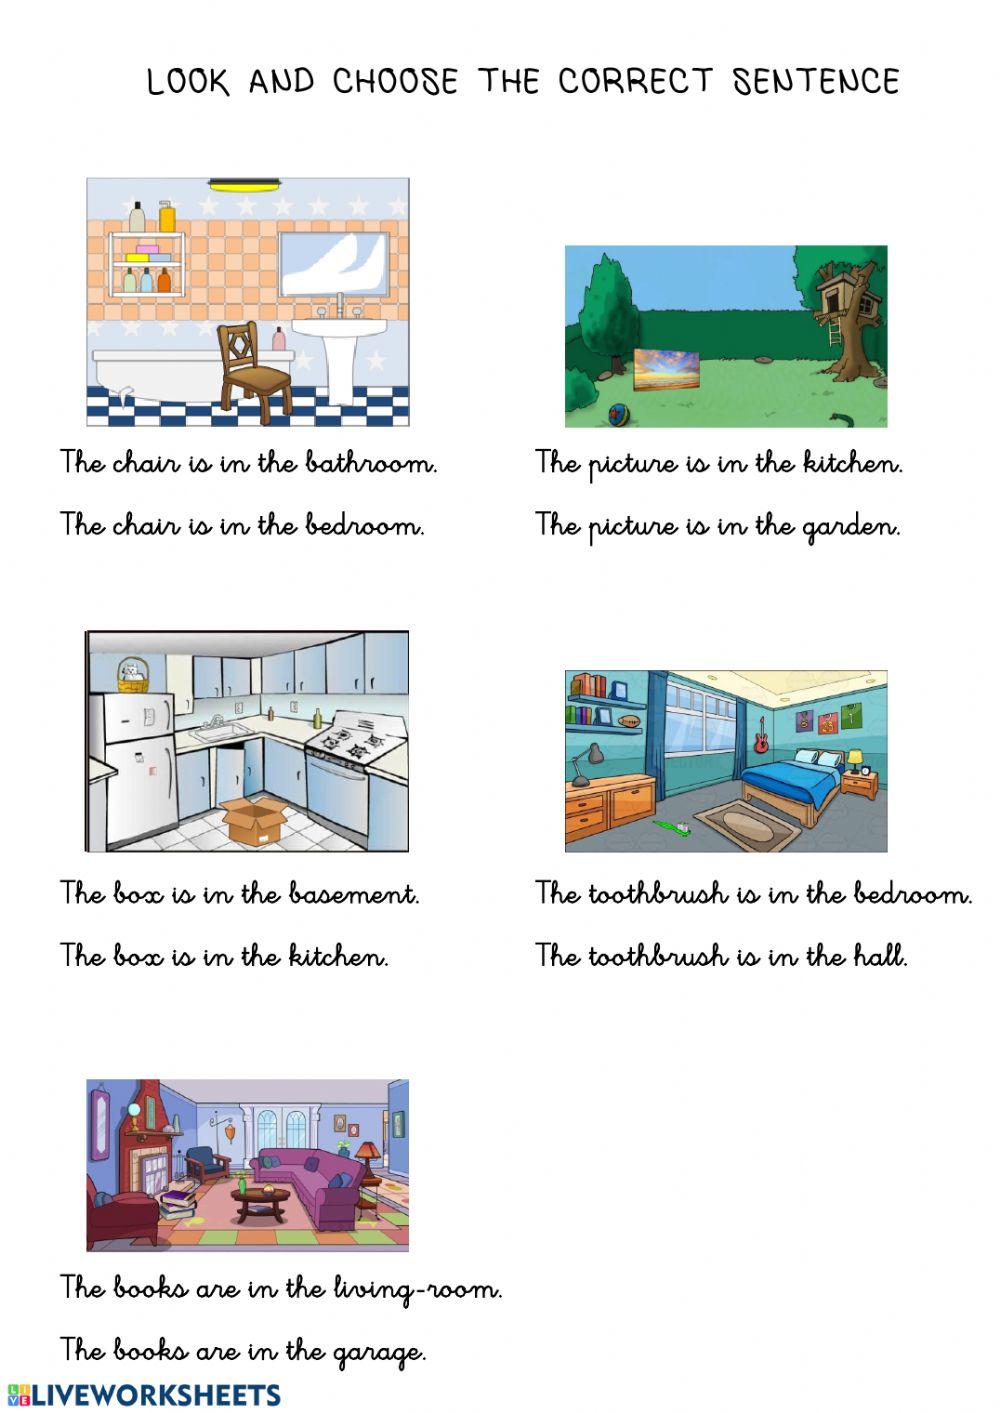 OBJECTS Look and choose the correct sentence